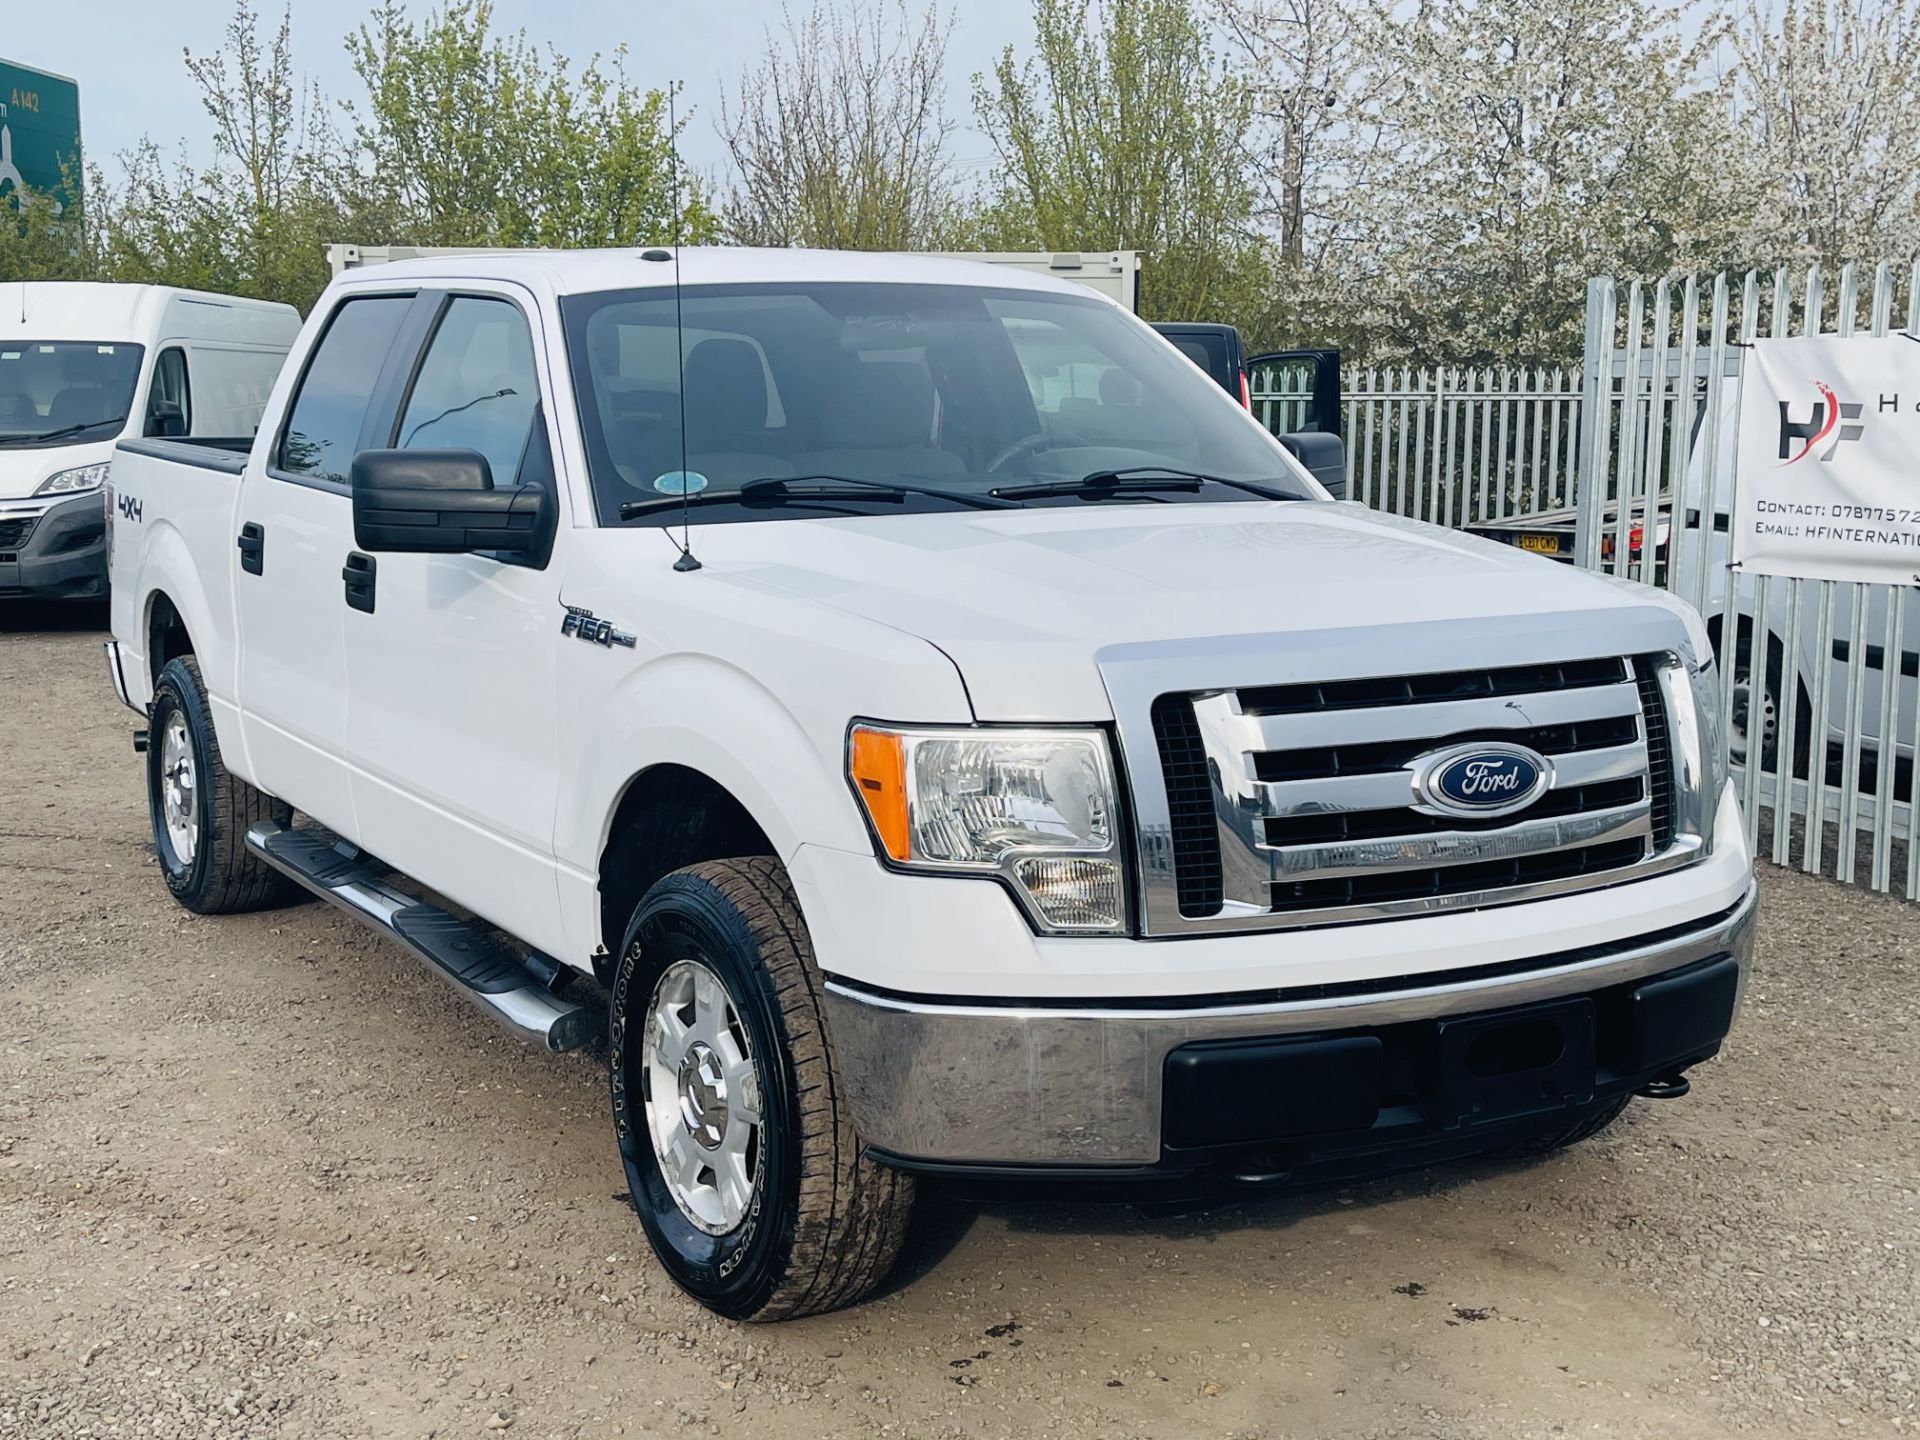 Ford F-150 XLT 4.6L V8 Super-crew 4WD 2010 ' 2010 Year' 6 Seats - Air con - NO VAT SAVE 20% - Image 2 of 24